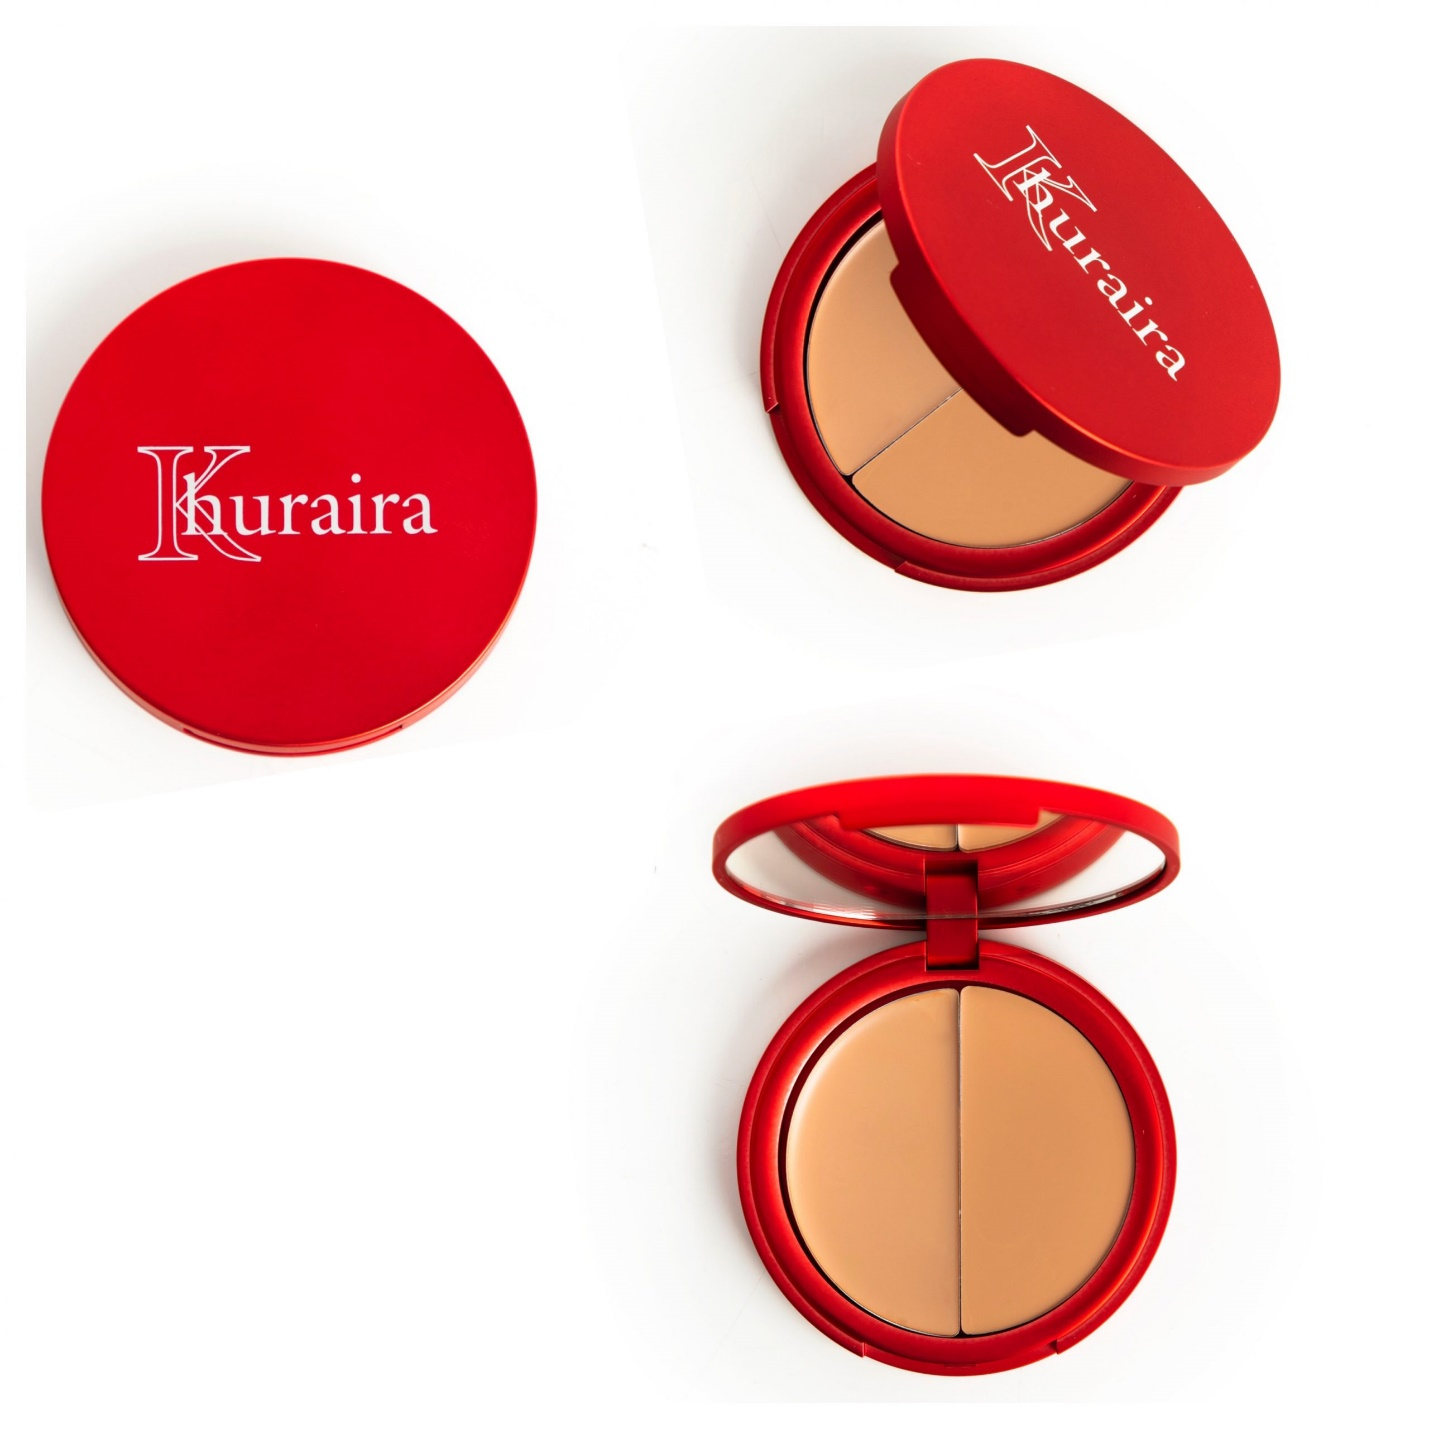 Khuraira Dual Camouflage Concealer can be used as corrective makeup to conceal faults in the skin.